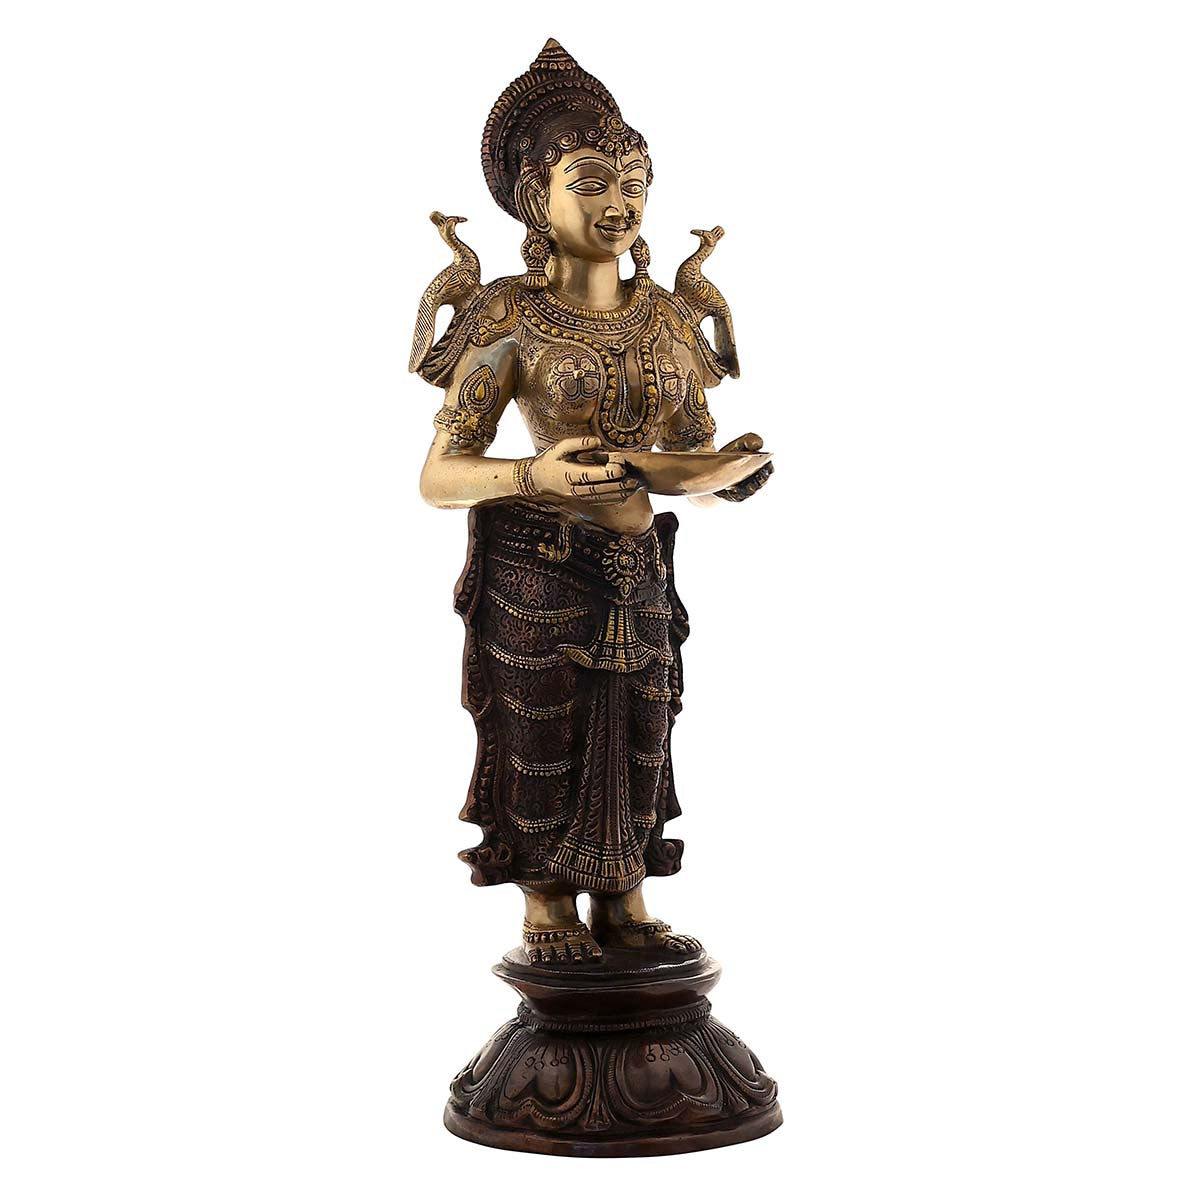 Lord laxmi Standing with Deep Made of Pure Brass - 10 x 9.5 x 30 Inch, 15.8 Kg